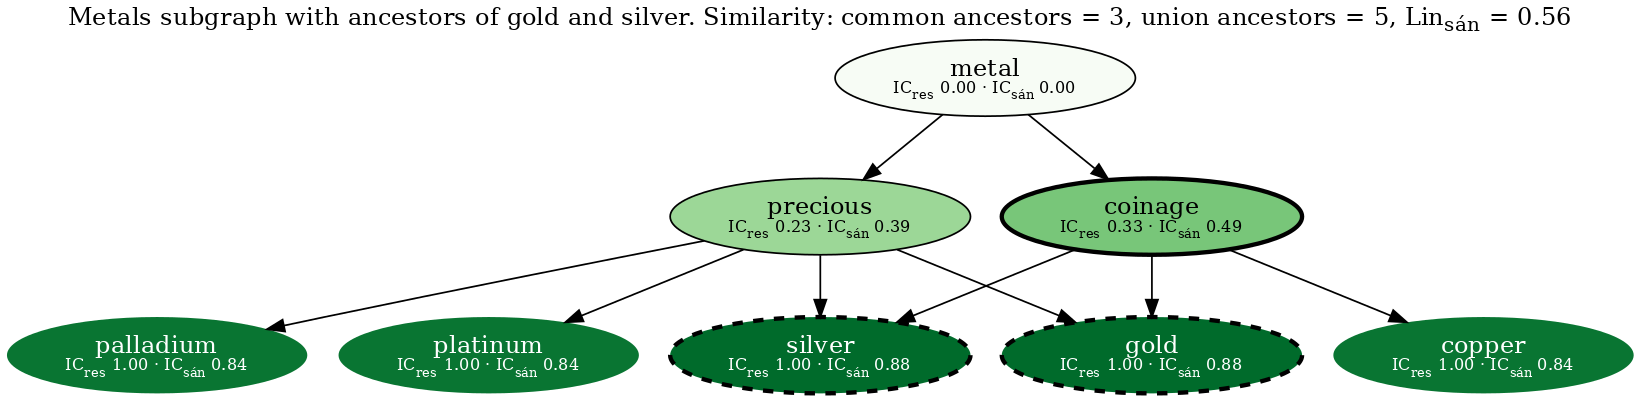 Metals ontology from Couto & Silva (2011) showing similarity between gold and silver